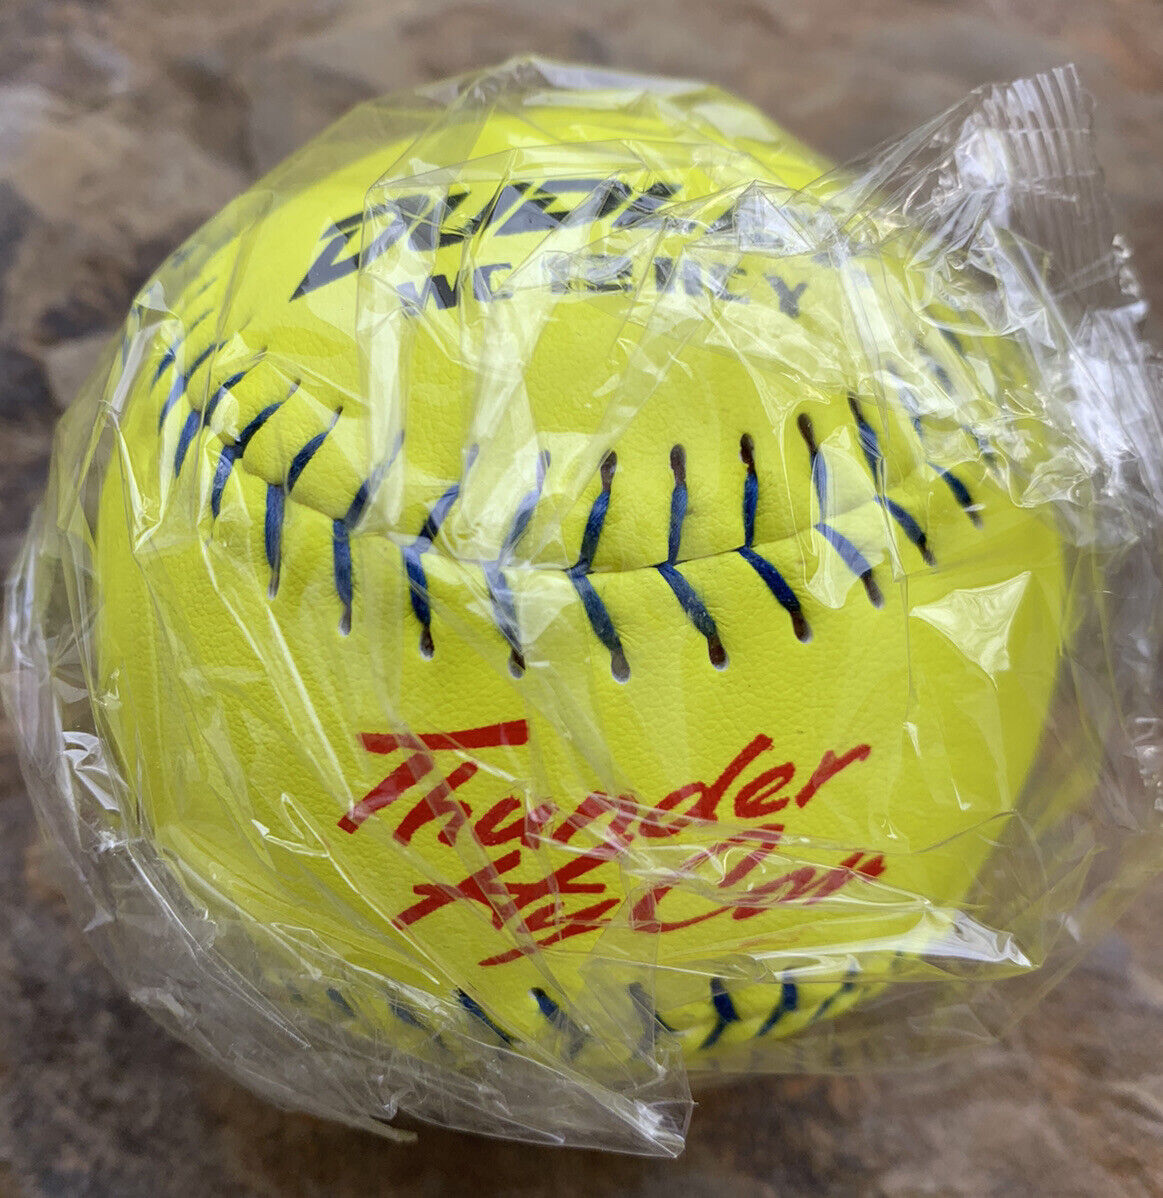 Dudley Thunder Hycon Usssa Classic Plus Softball. New